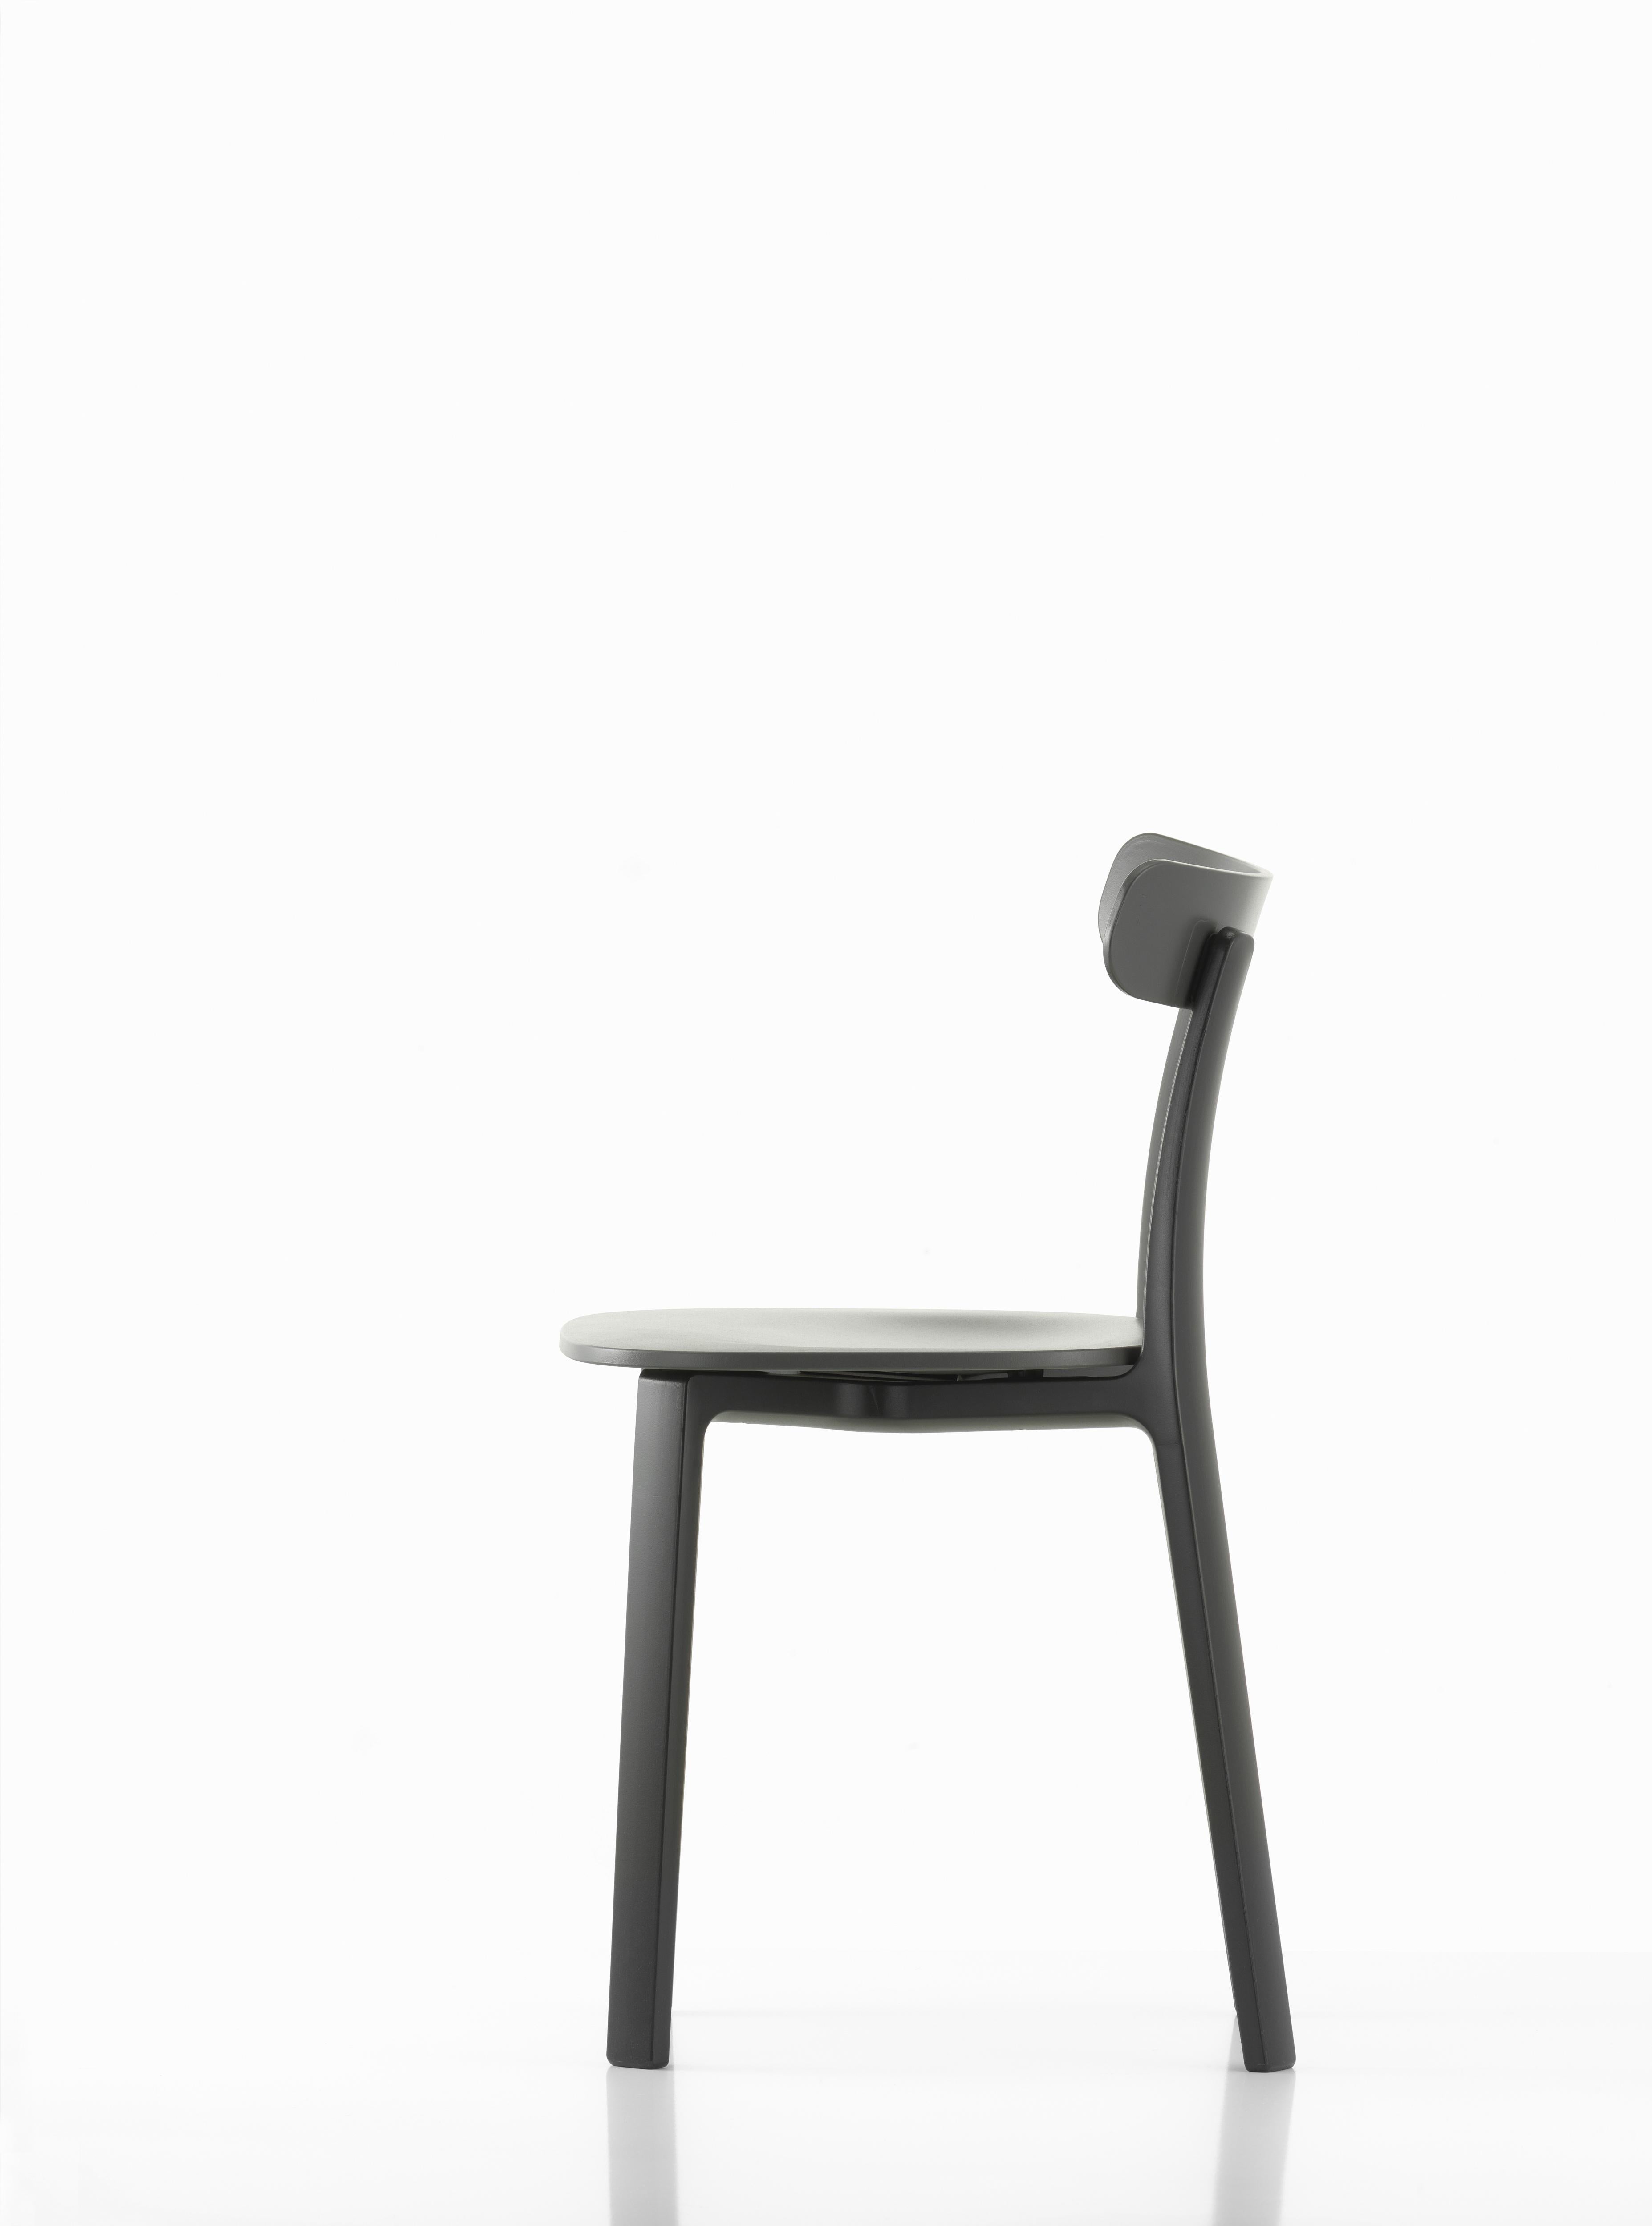 Modern Vitra All Plastic Chair in Graphite Grey Two Tone by Jasper Morrison For Sale